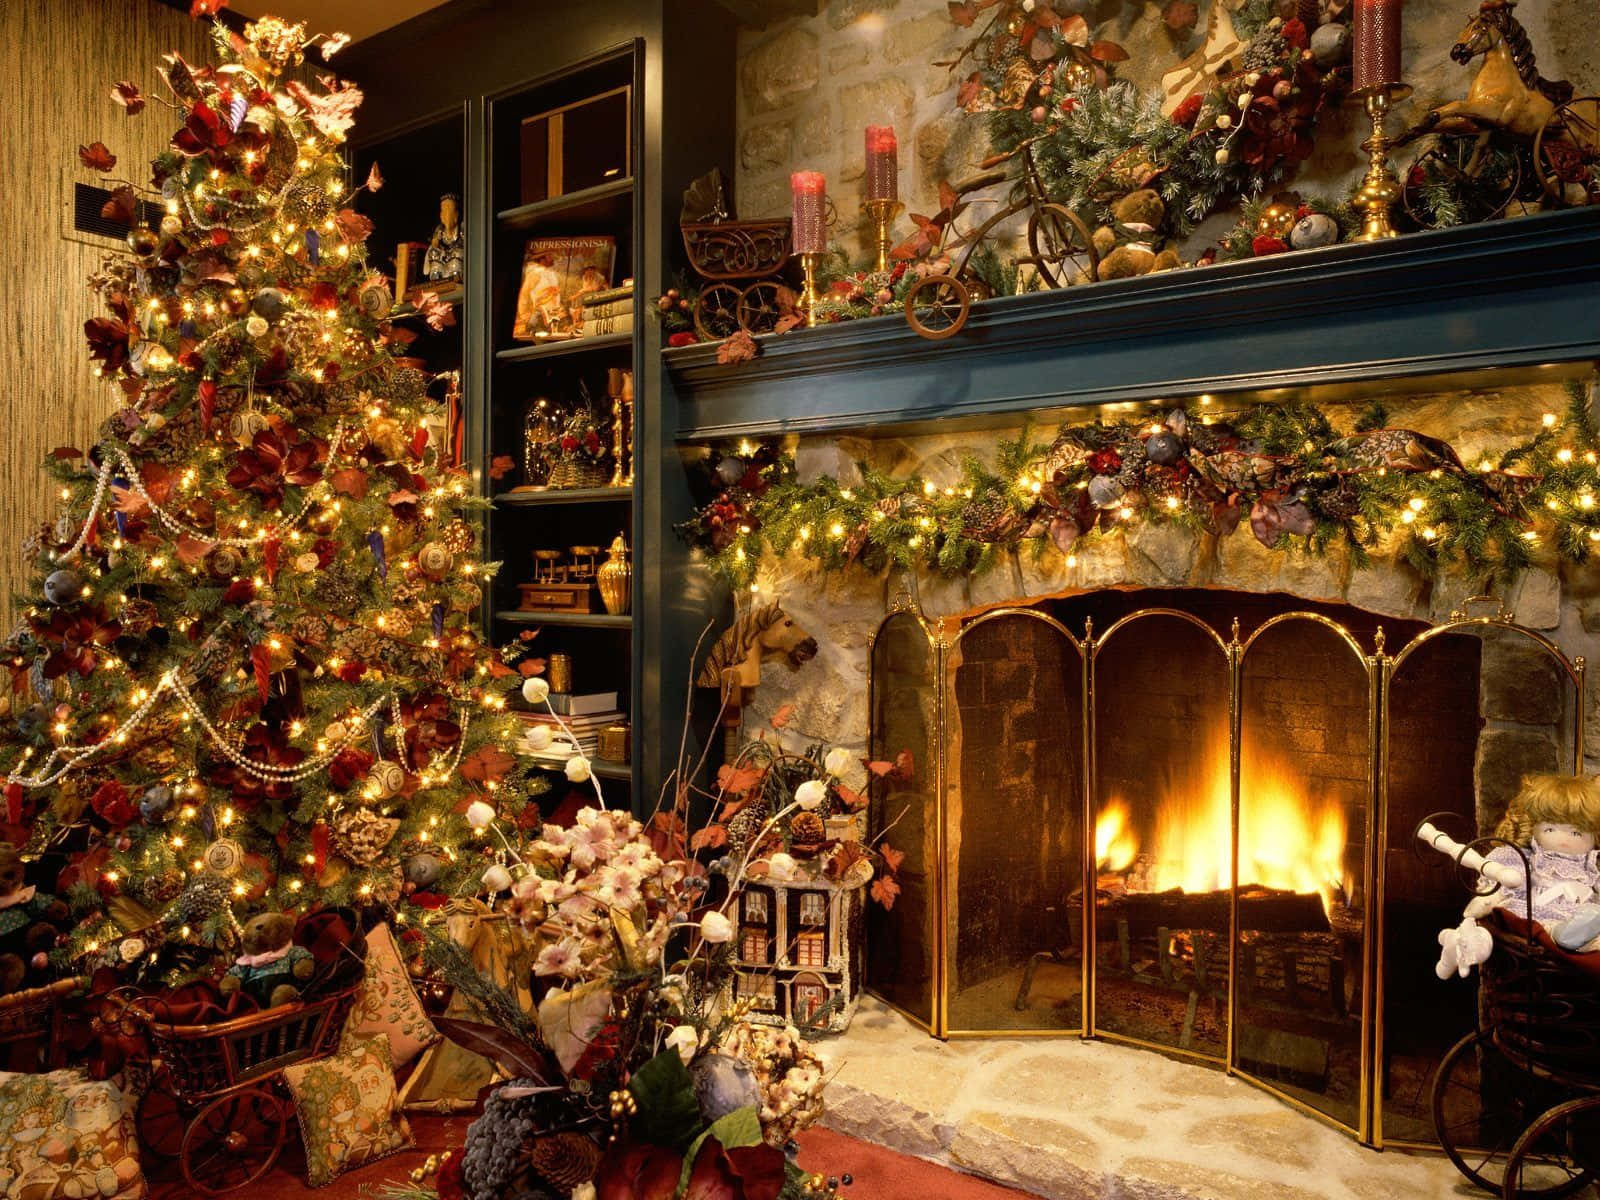 A Fireplace With A Christmas Tree And Decorations Wallpaper